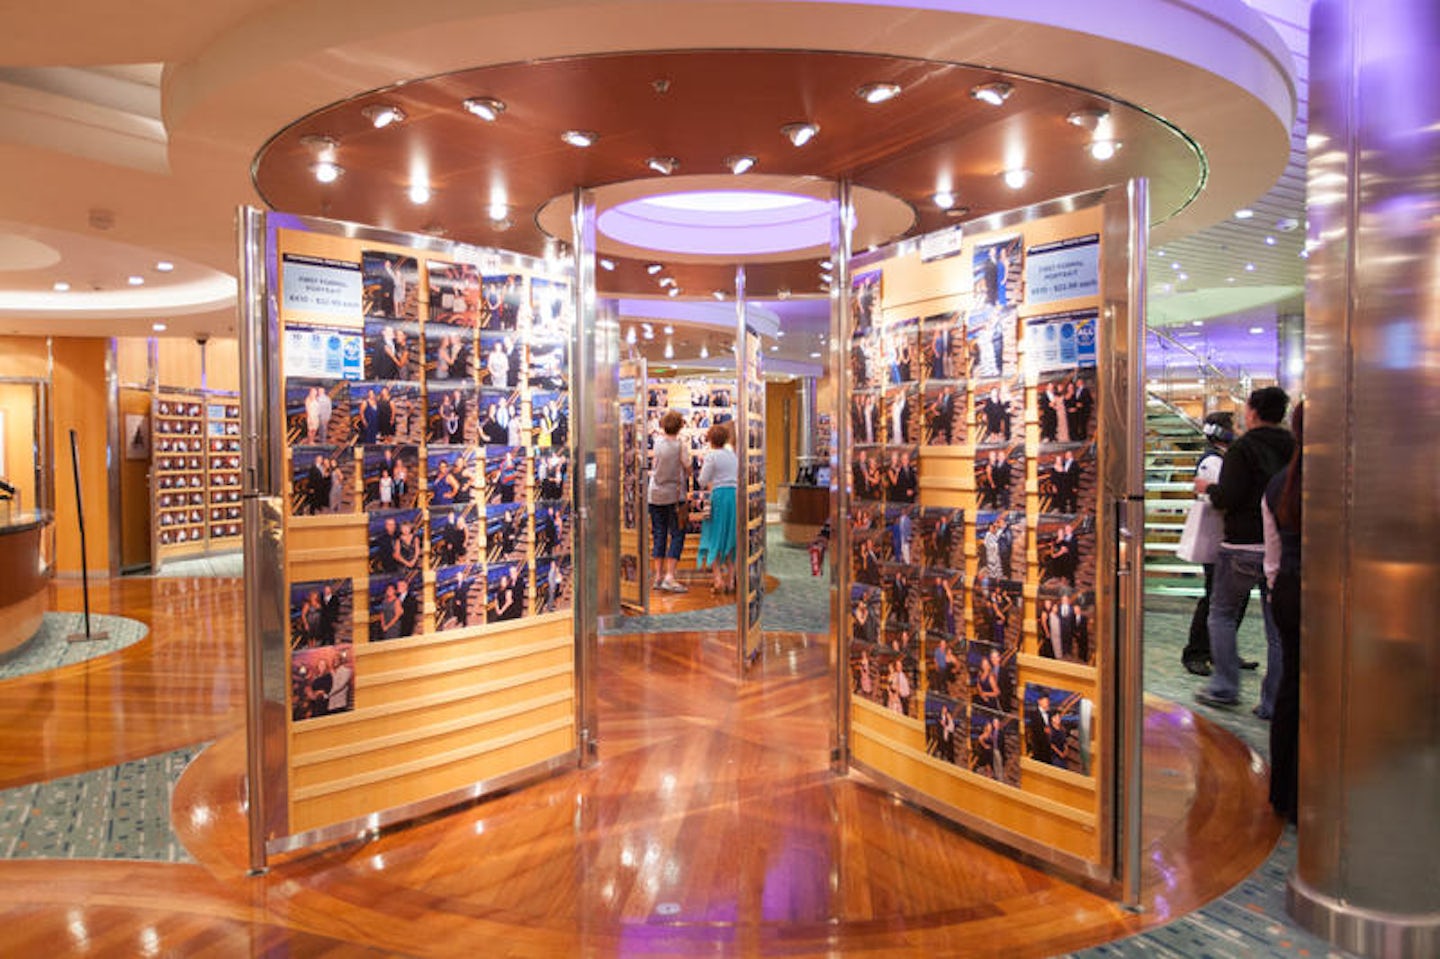 Photo Gallery on Independence of the Seas